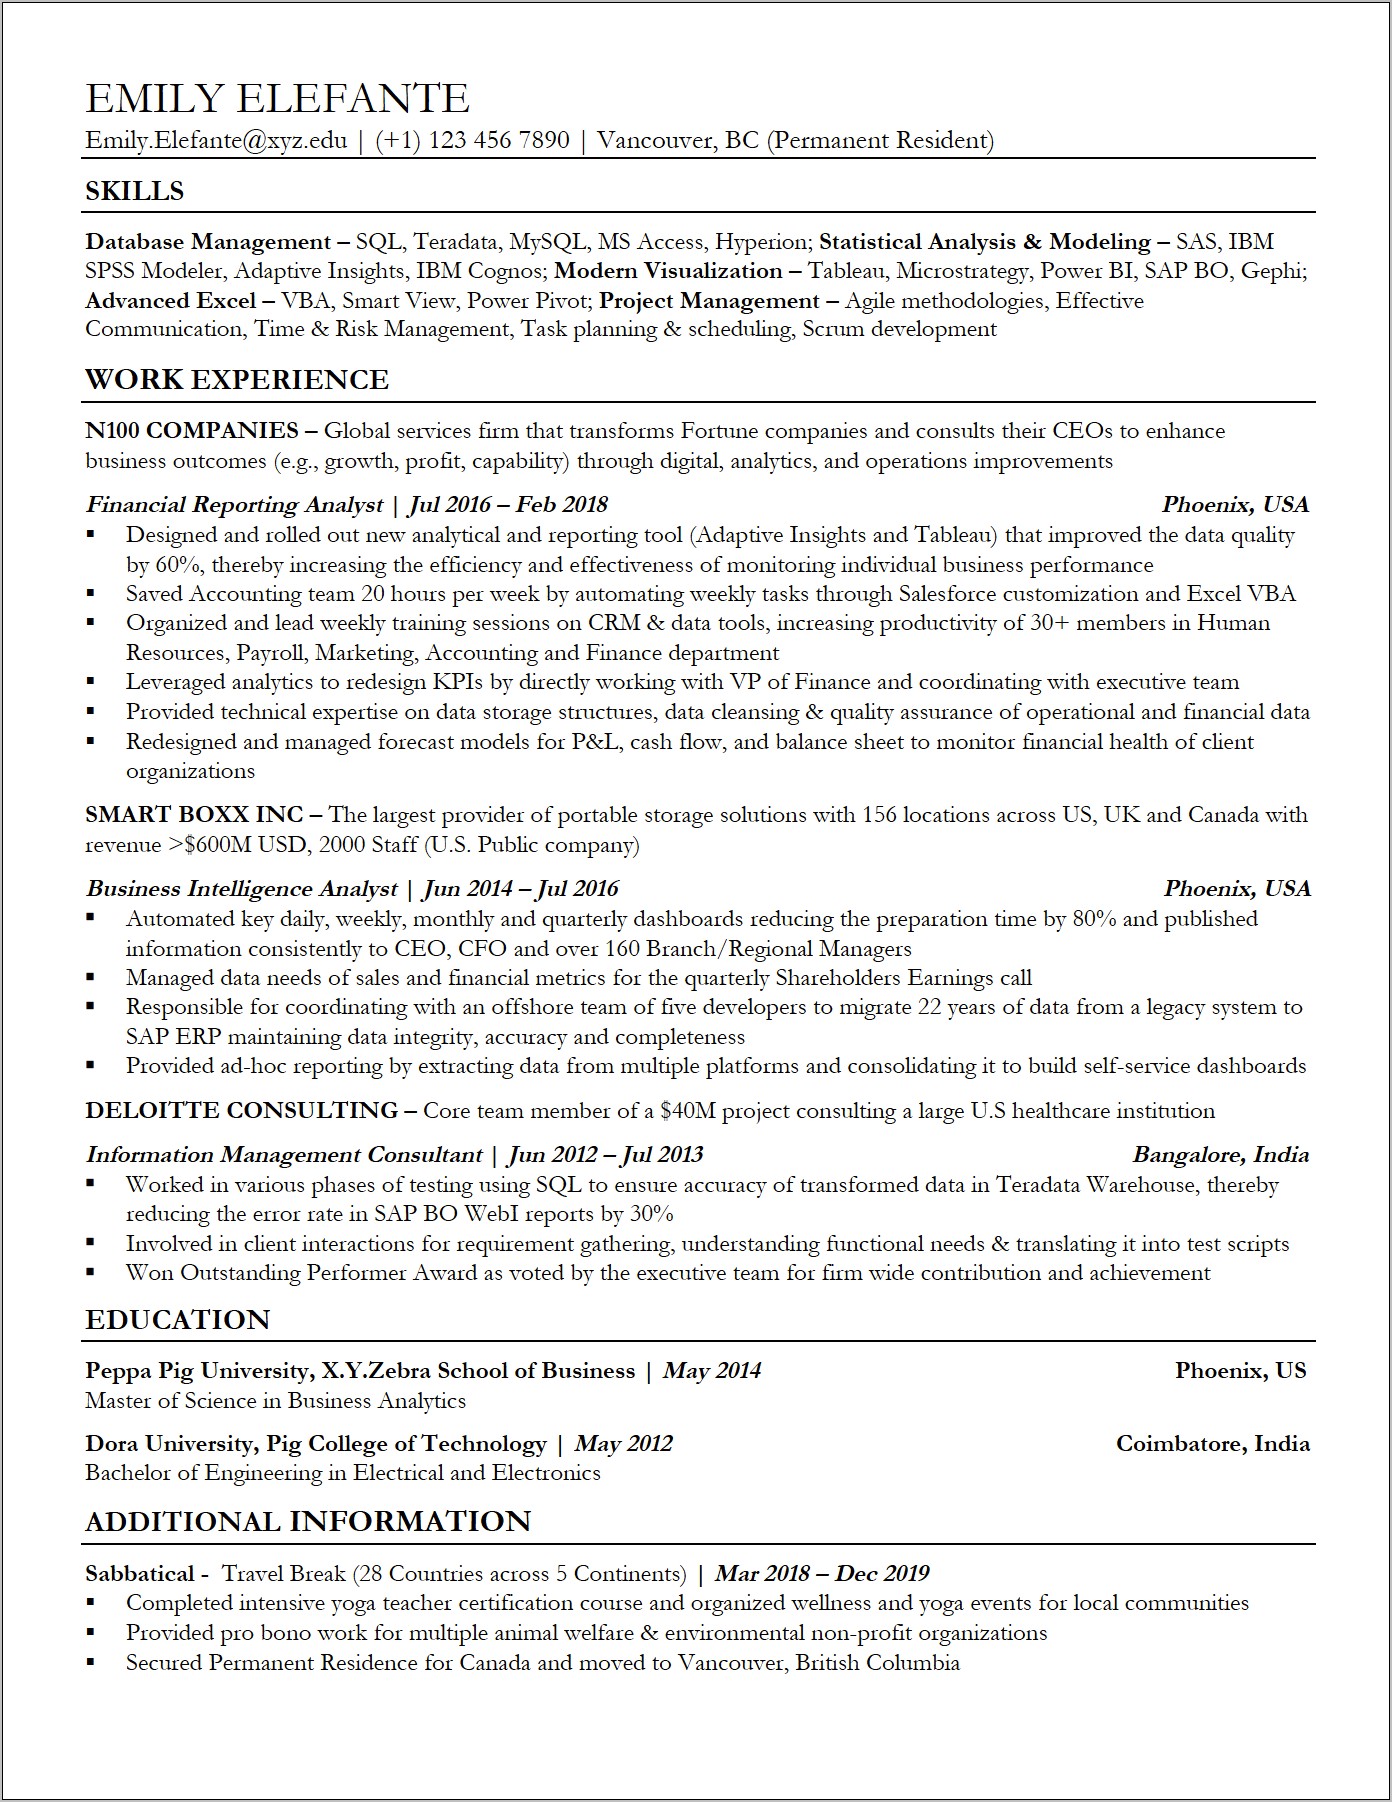 Best Place To Post My Resume